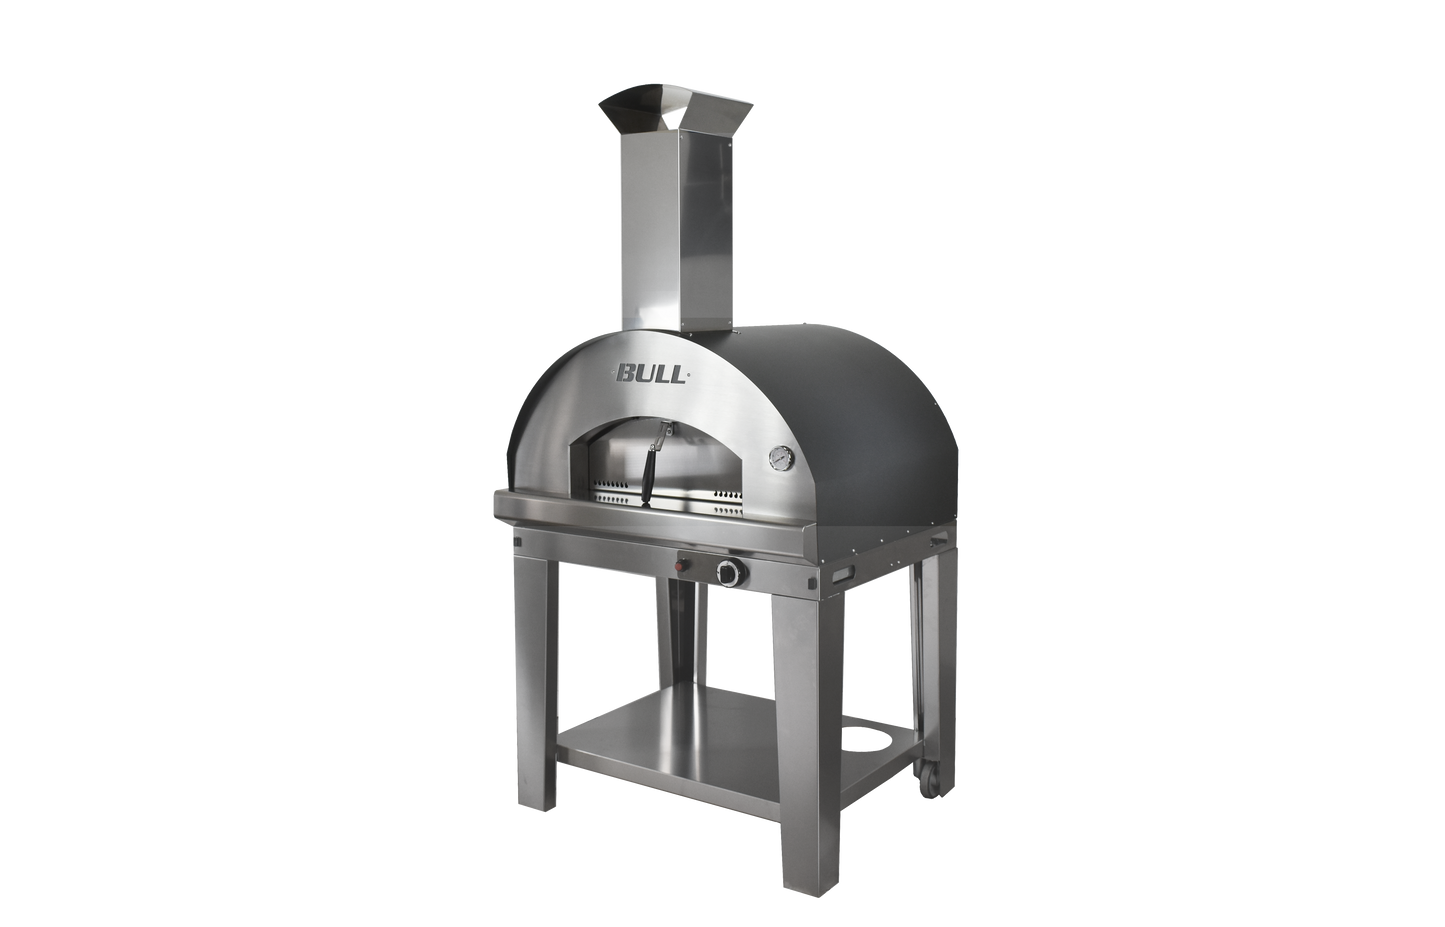 BULL GAS FUELLED Large Pizza Oven Cart Bottom Only